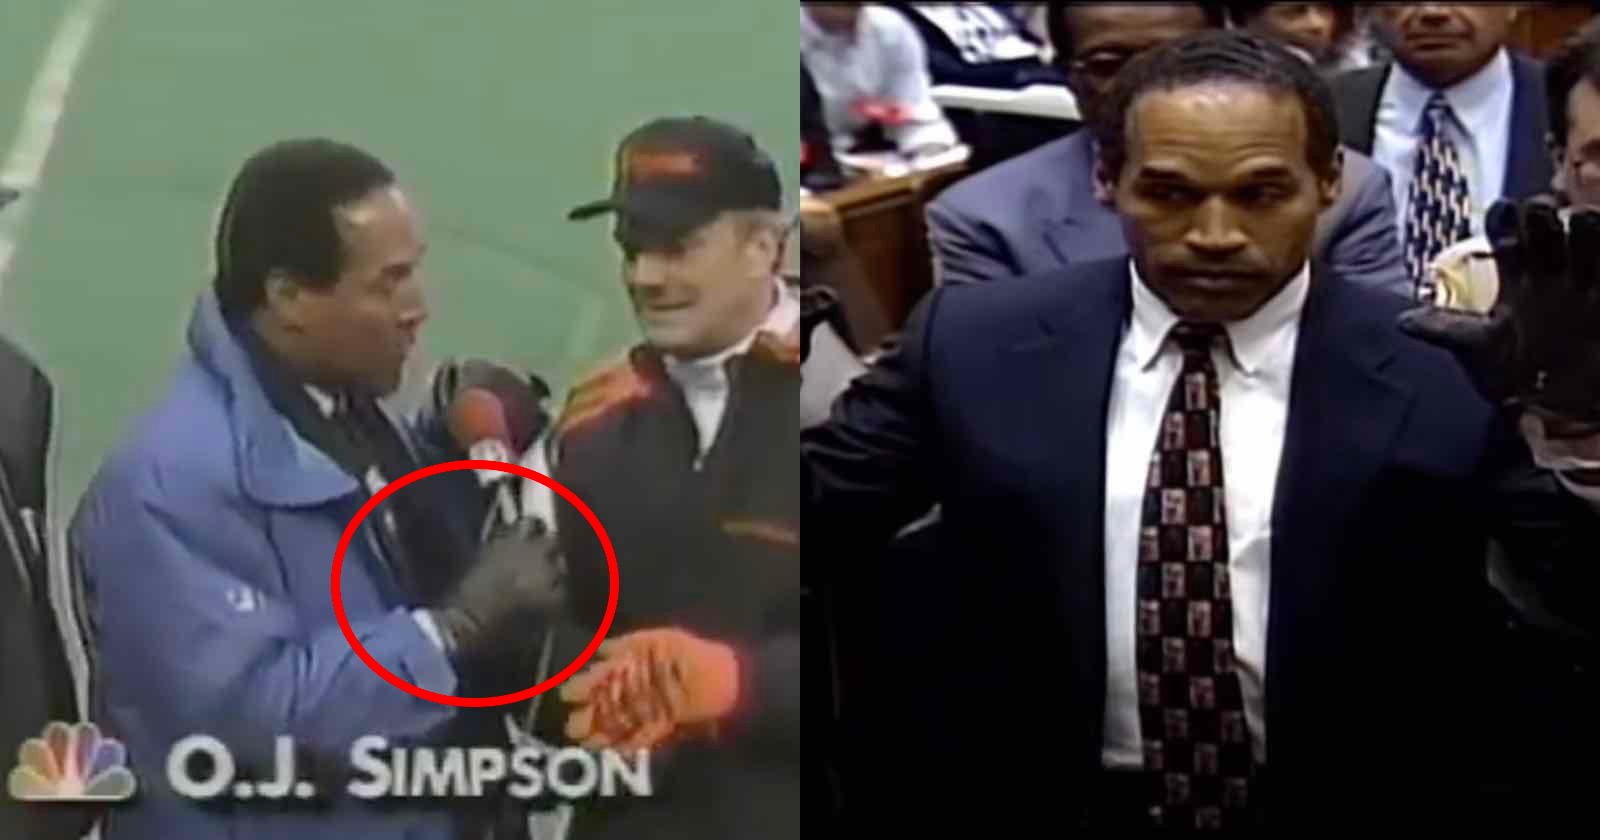 Photographers Image of O.J. Simpson in Gloves Became Significant Years Later